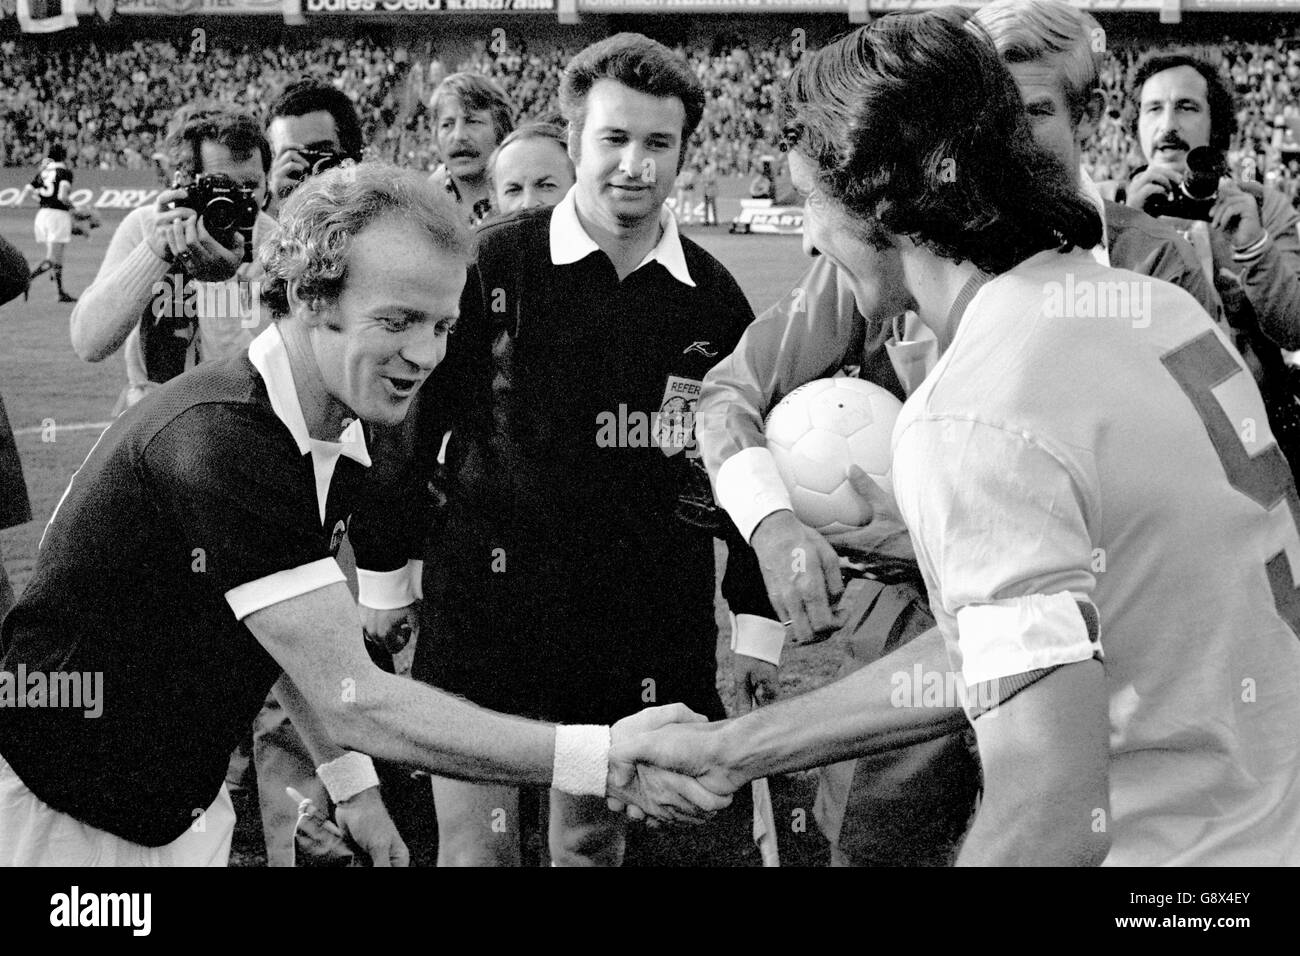 Soccer - World Cup West Germany 1974 - Group Two - Brazil v Scotland - Wald Stadium. The two captains, Scotland's Billy Bremner (l) and Brazil's Piazza (r), shake hands before the match Stock Photo